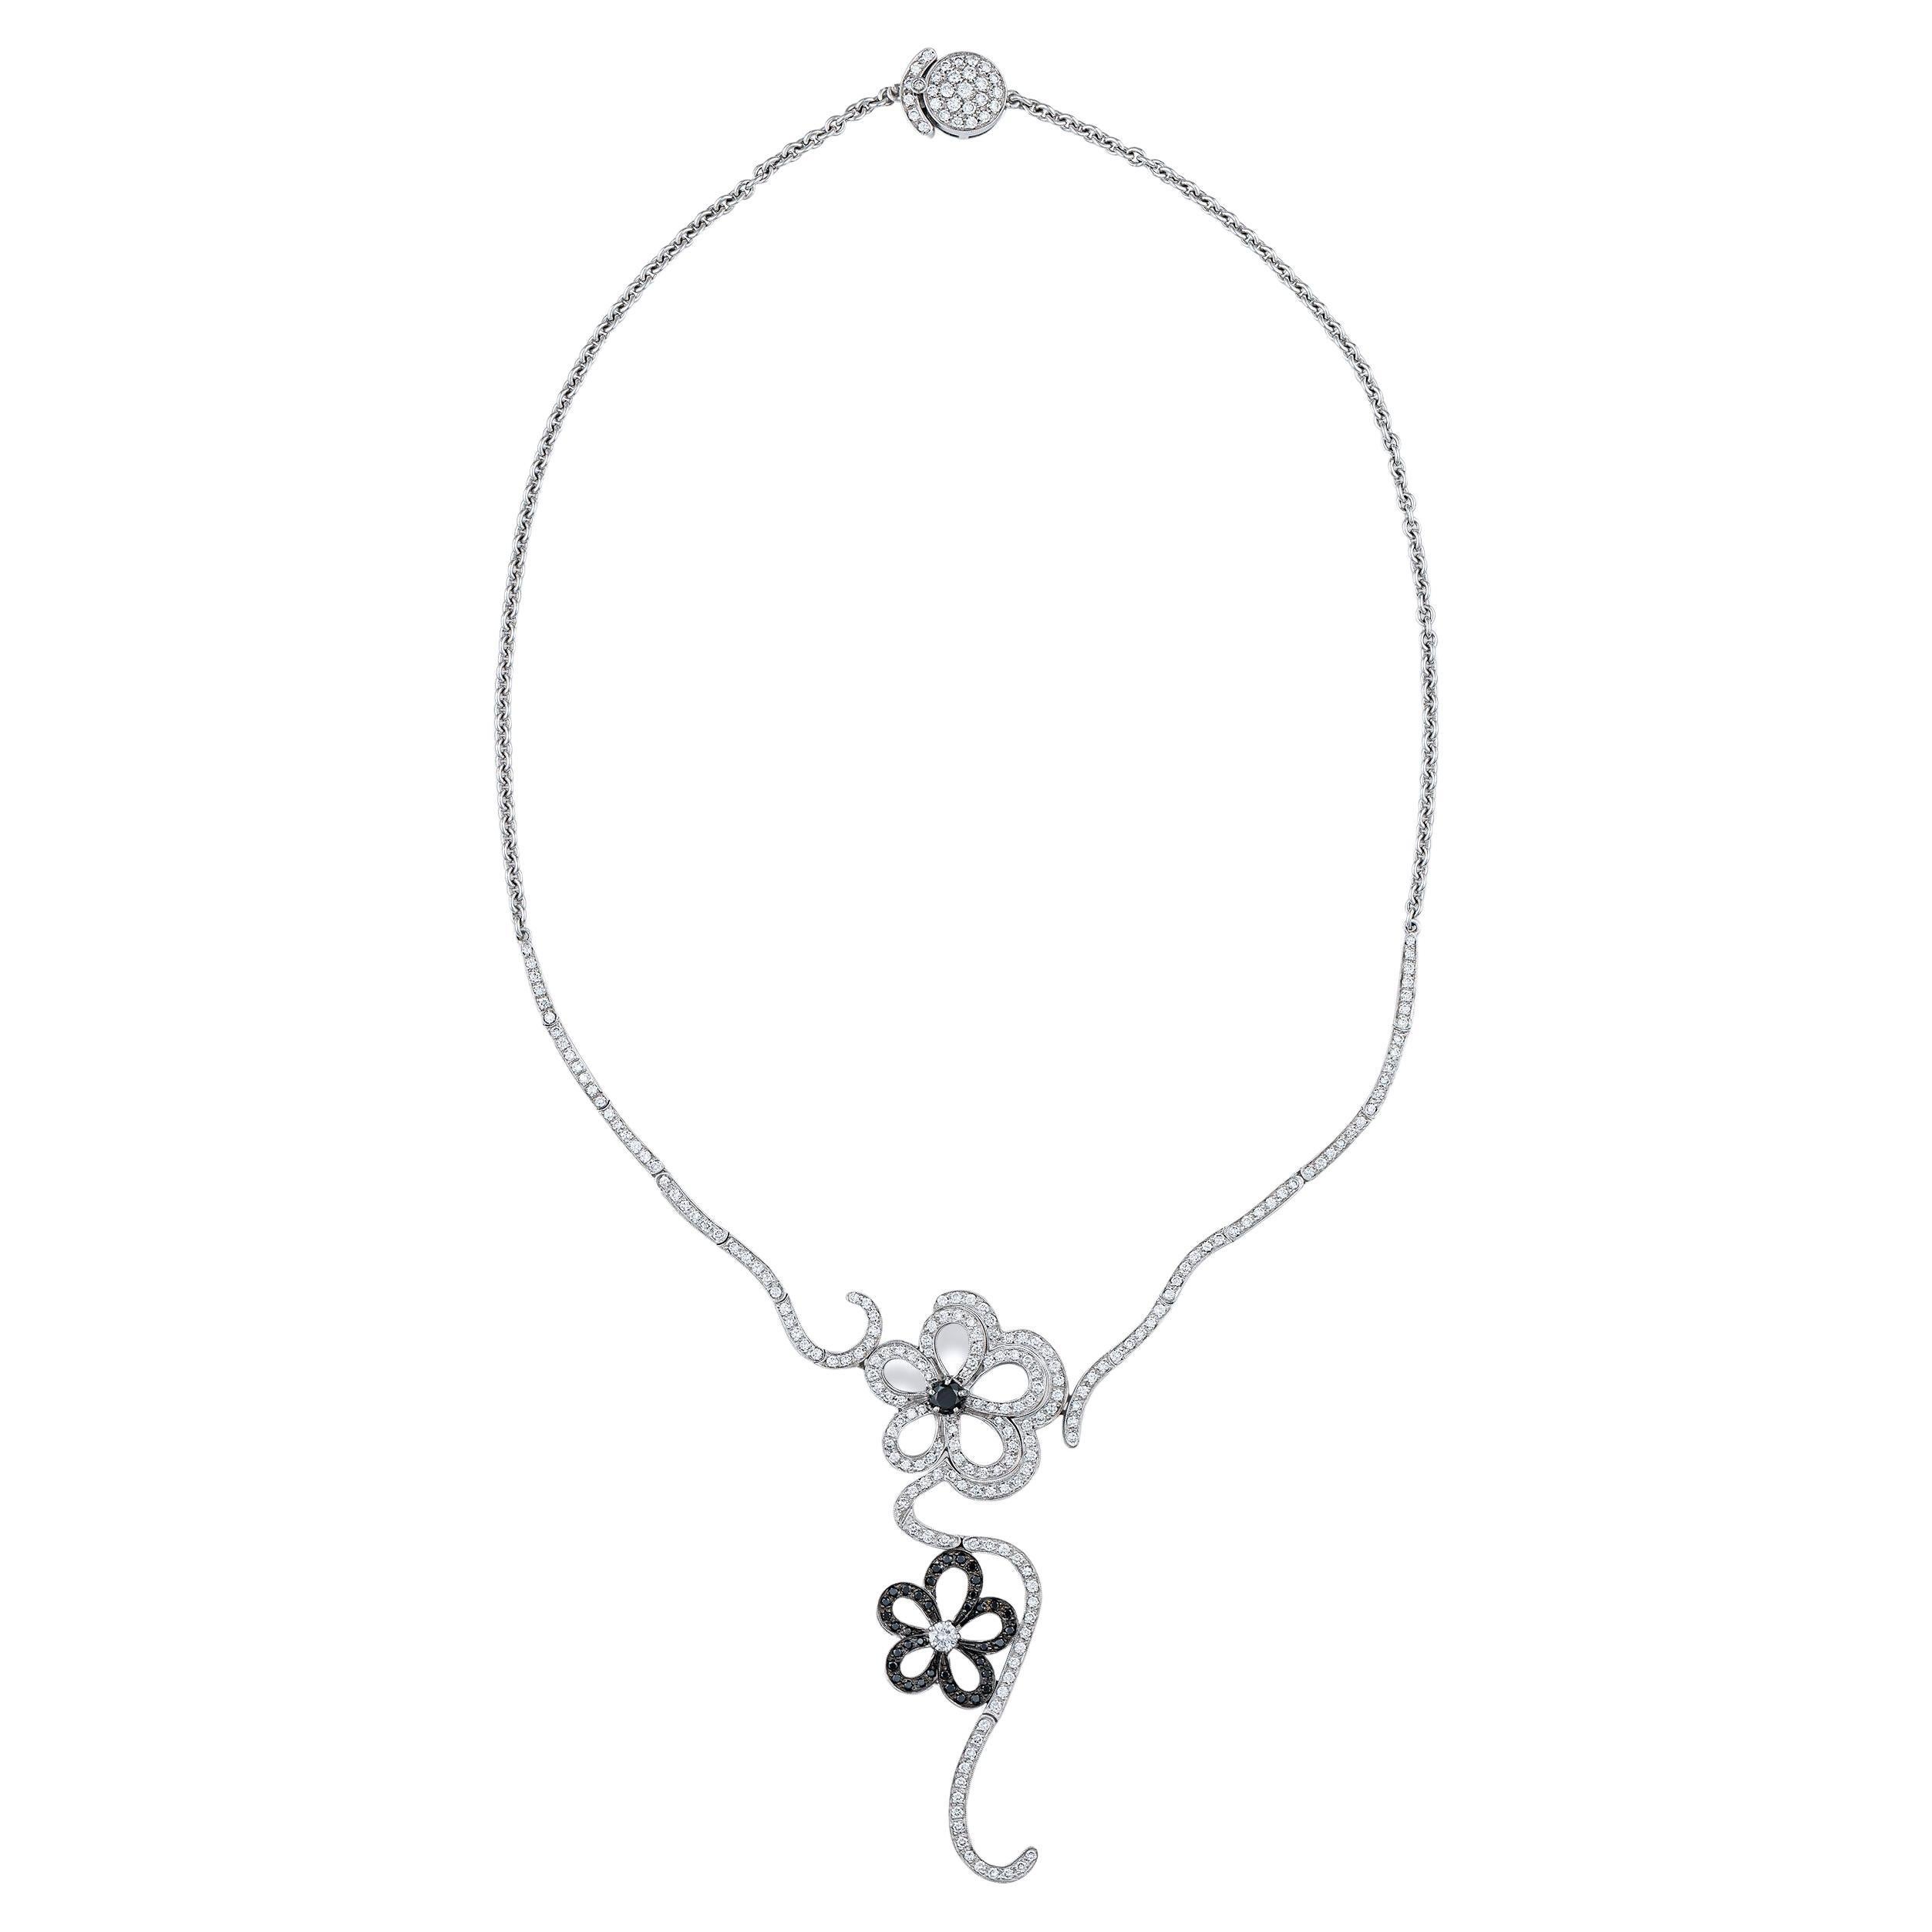 Floral Motif White and Black Diamond Necklace For Sale